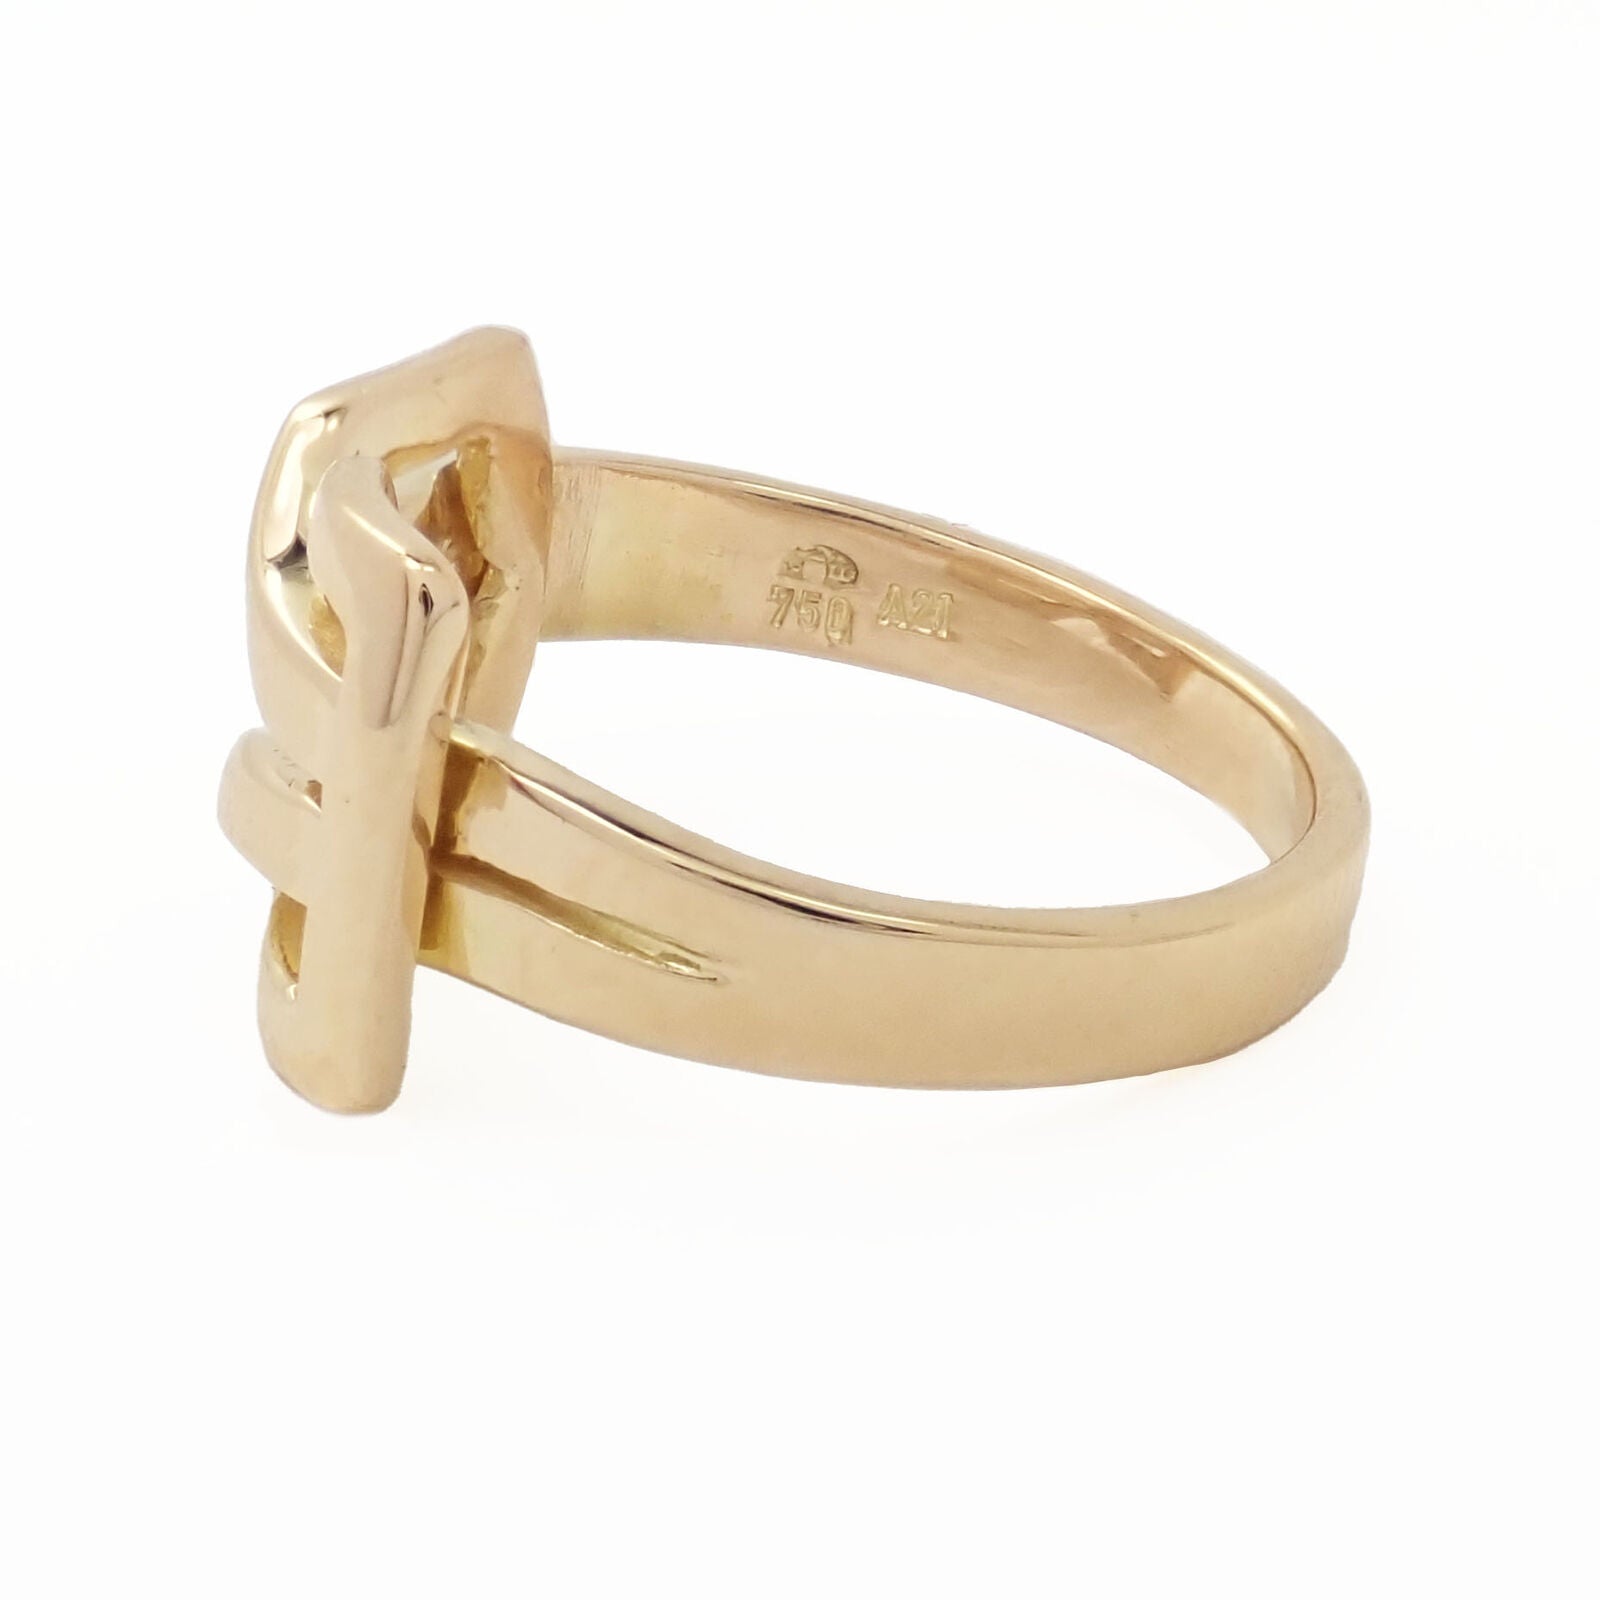 Lalaounis Jewelry & Watches:Fine Jewelry:Rings Authentic! Ilias Lalaounis Greece 18k Yellow Gold Belt Buckle Ring